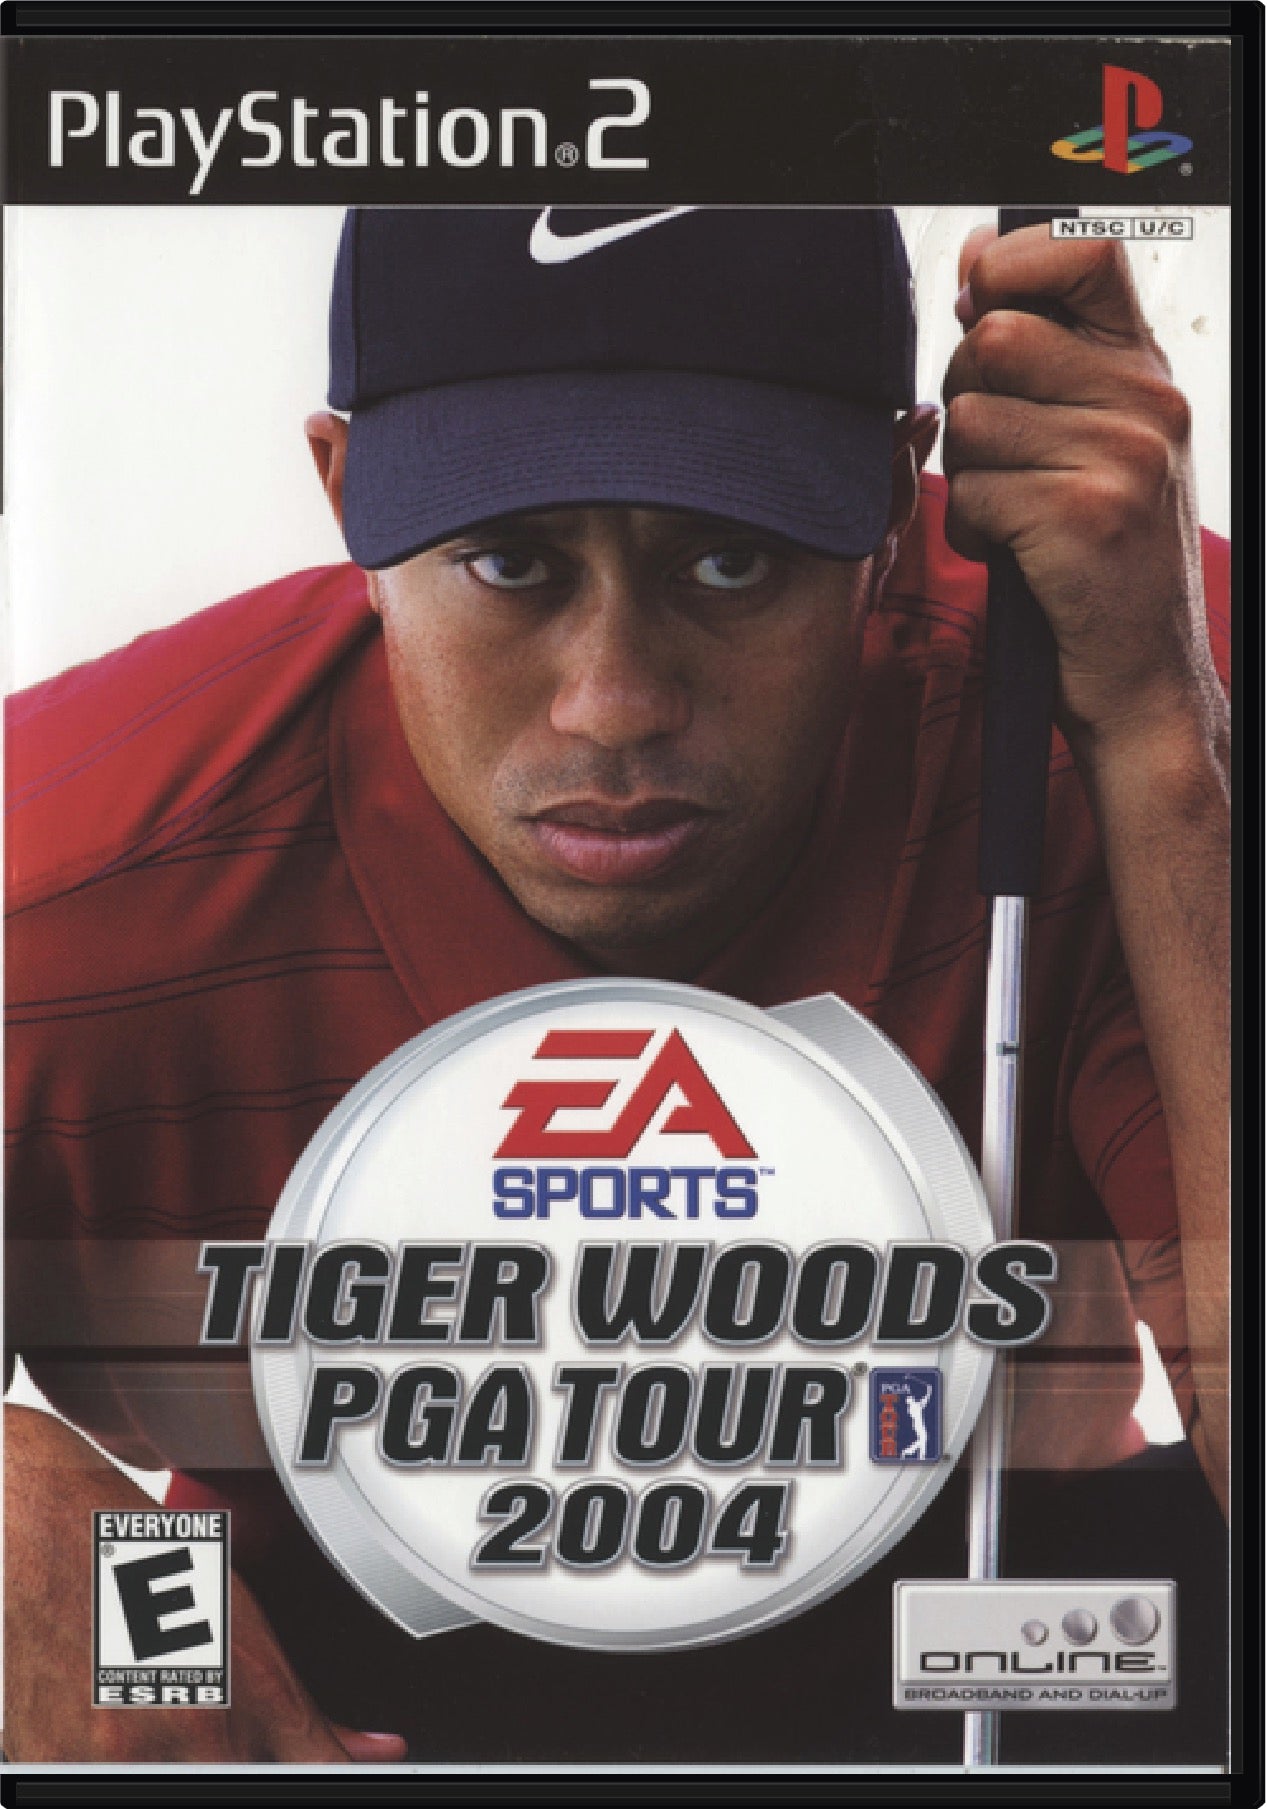 Tiger Woods PGA Tour 2004 Cover Art and Product Photo